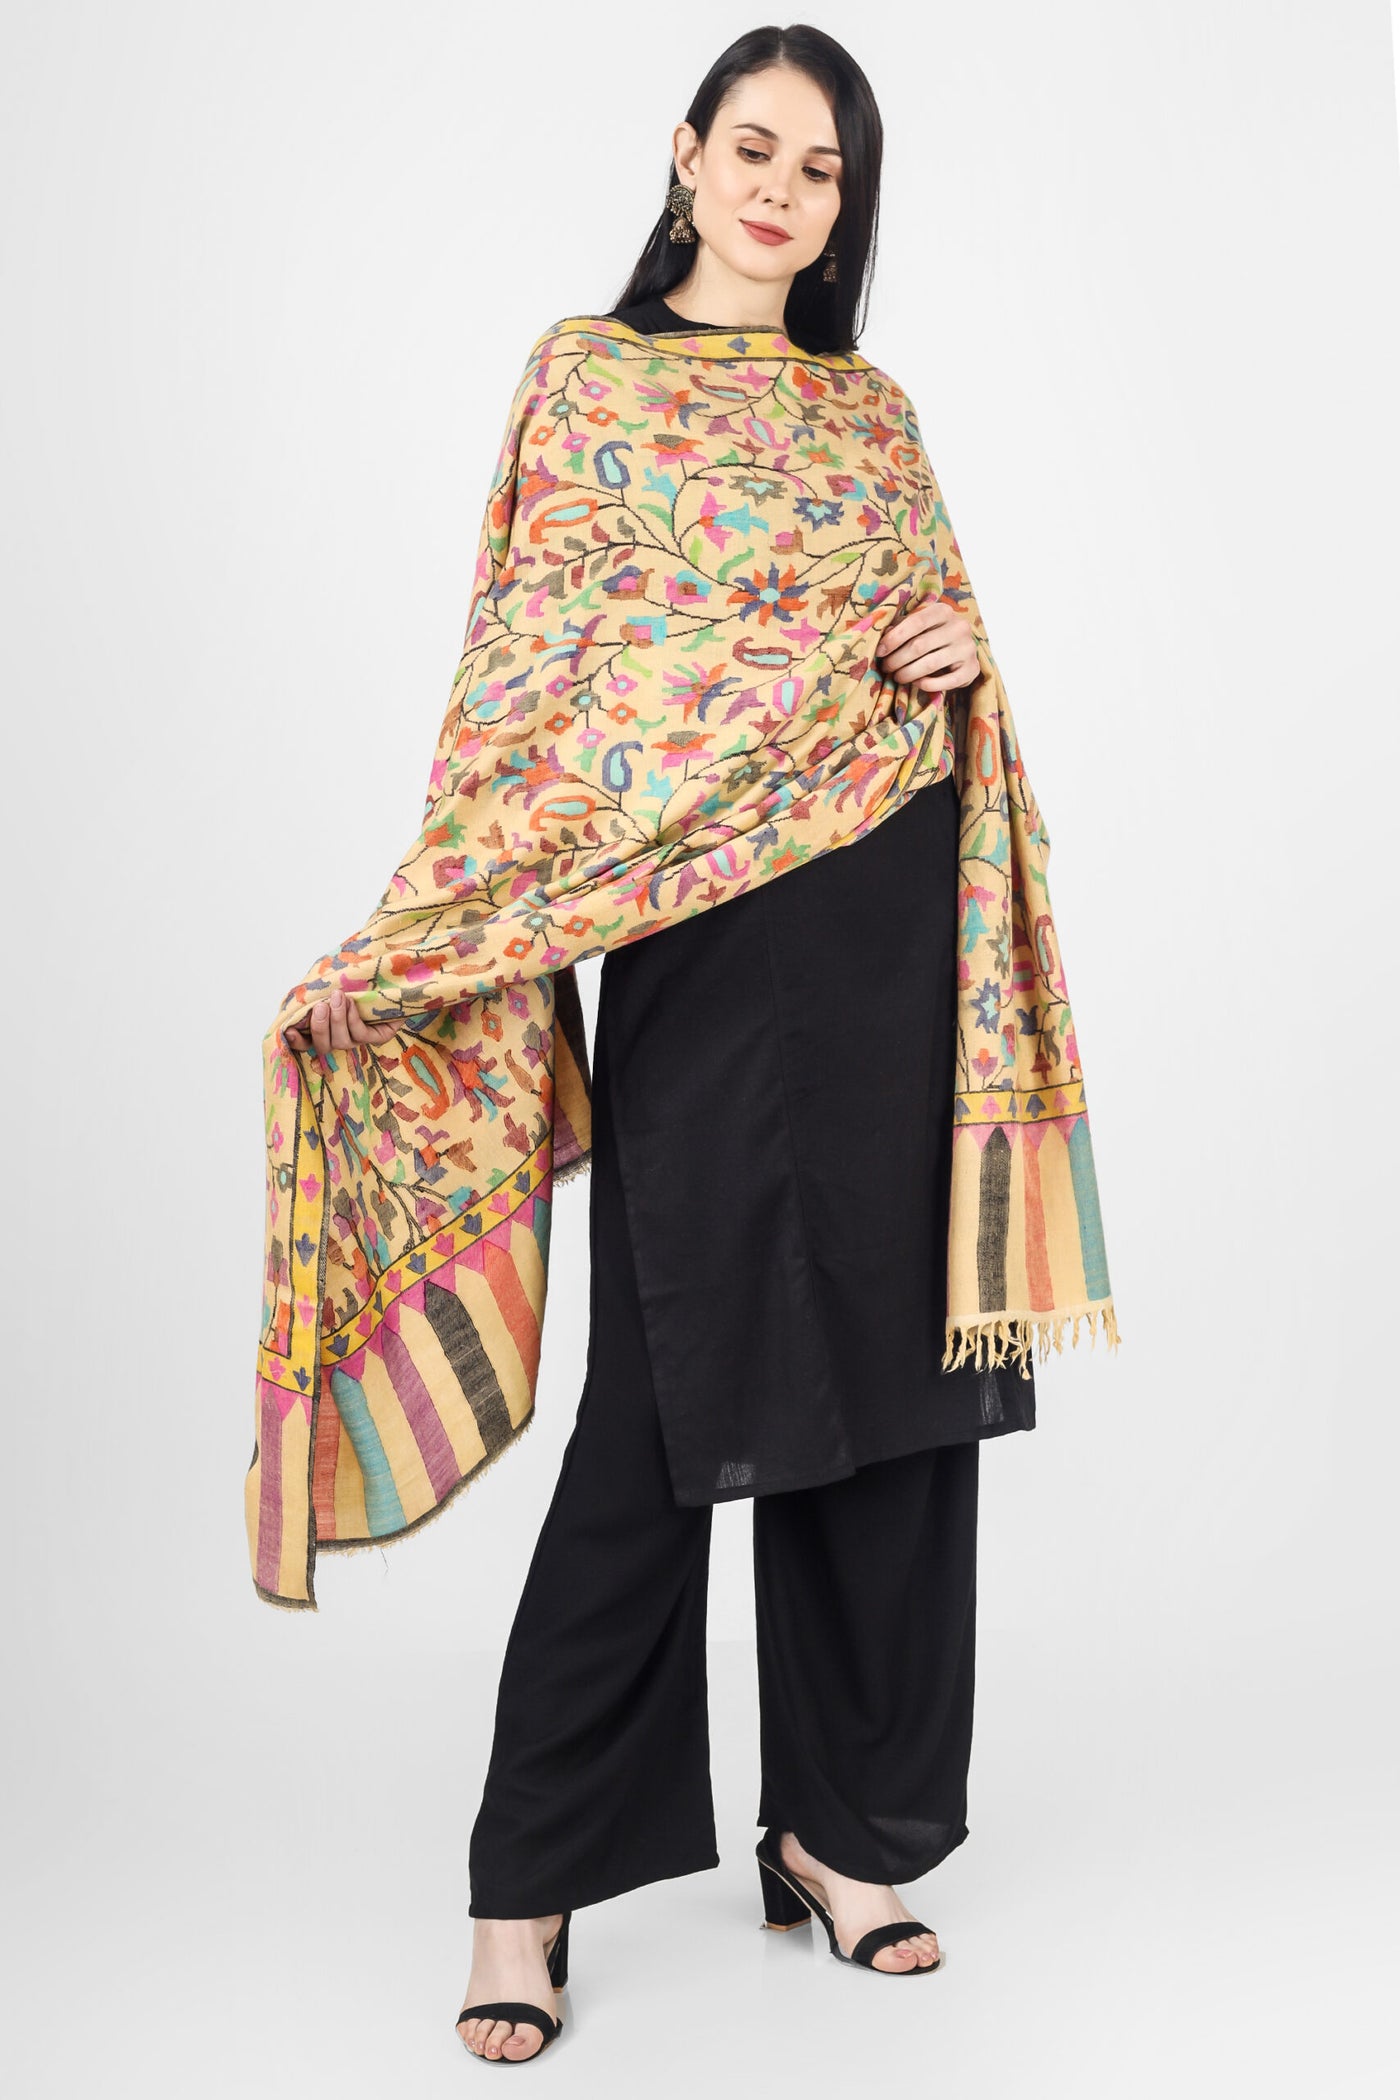 The blooming almond blossoms direct from the alcoves and gardens of Kashmir are elegantly hand-woven onto a luxurious, soft and warm yellow Pashmina Shawl,